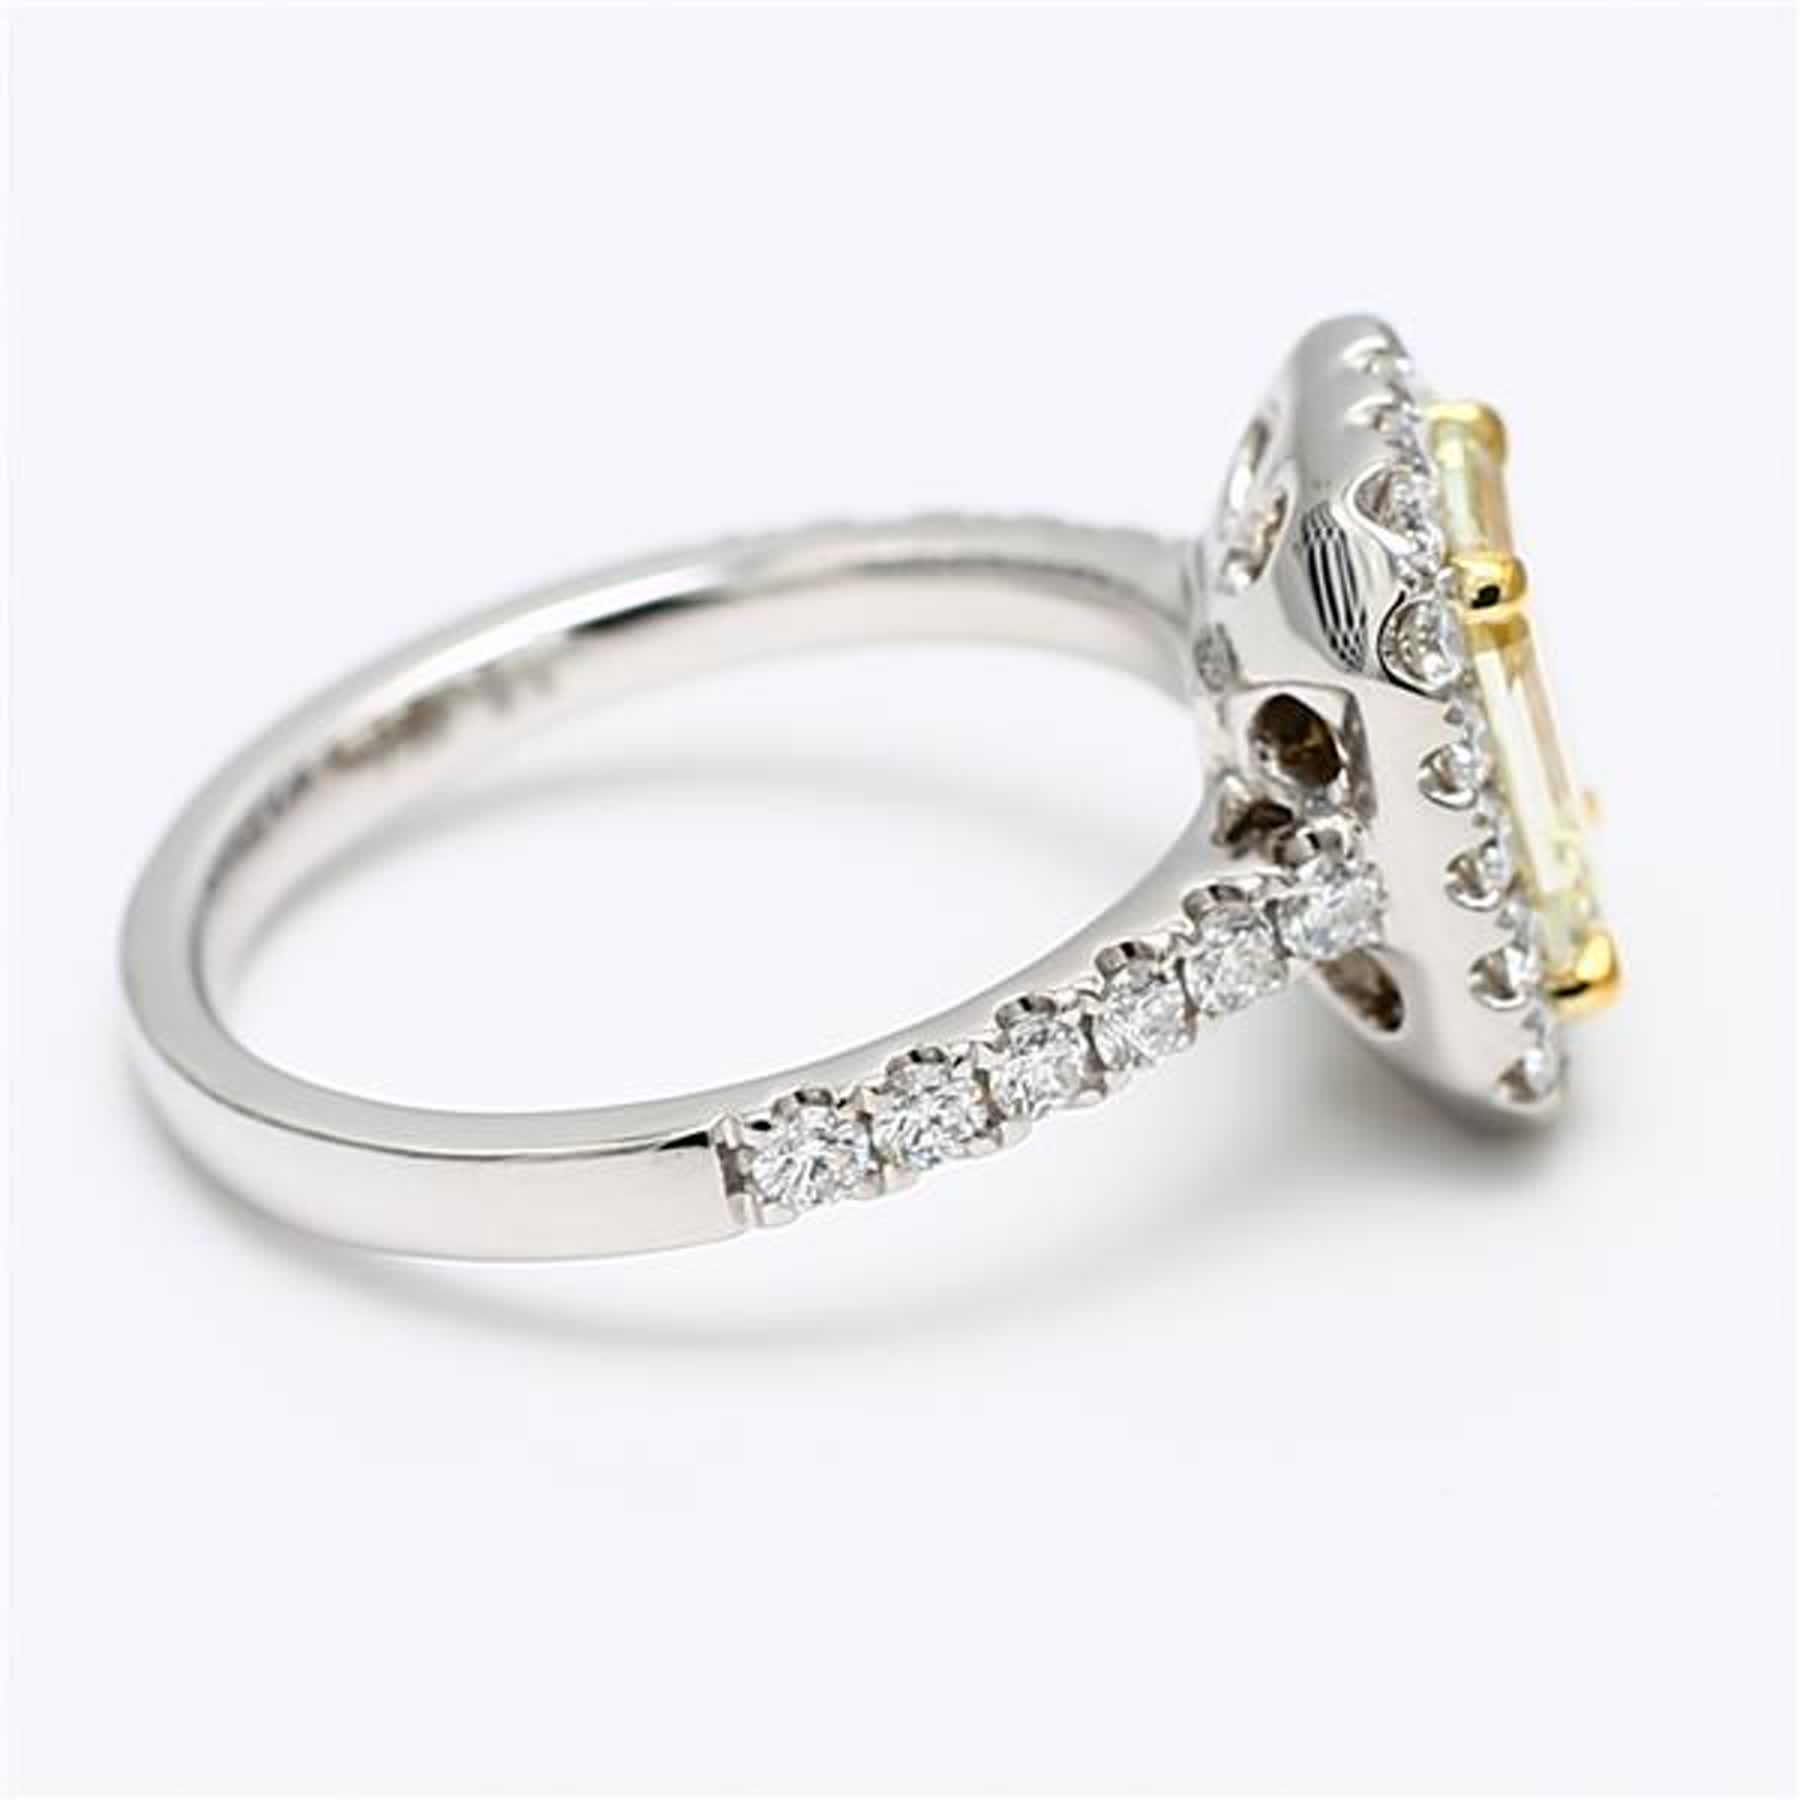 GIA Certified Natural Yellow Asscher and White Diamond 2.77 Carat TW Plat Ring